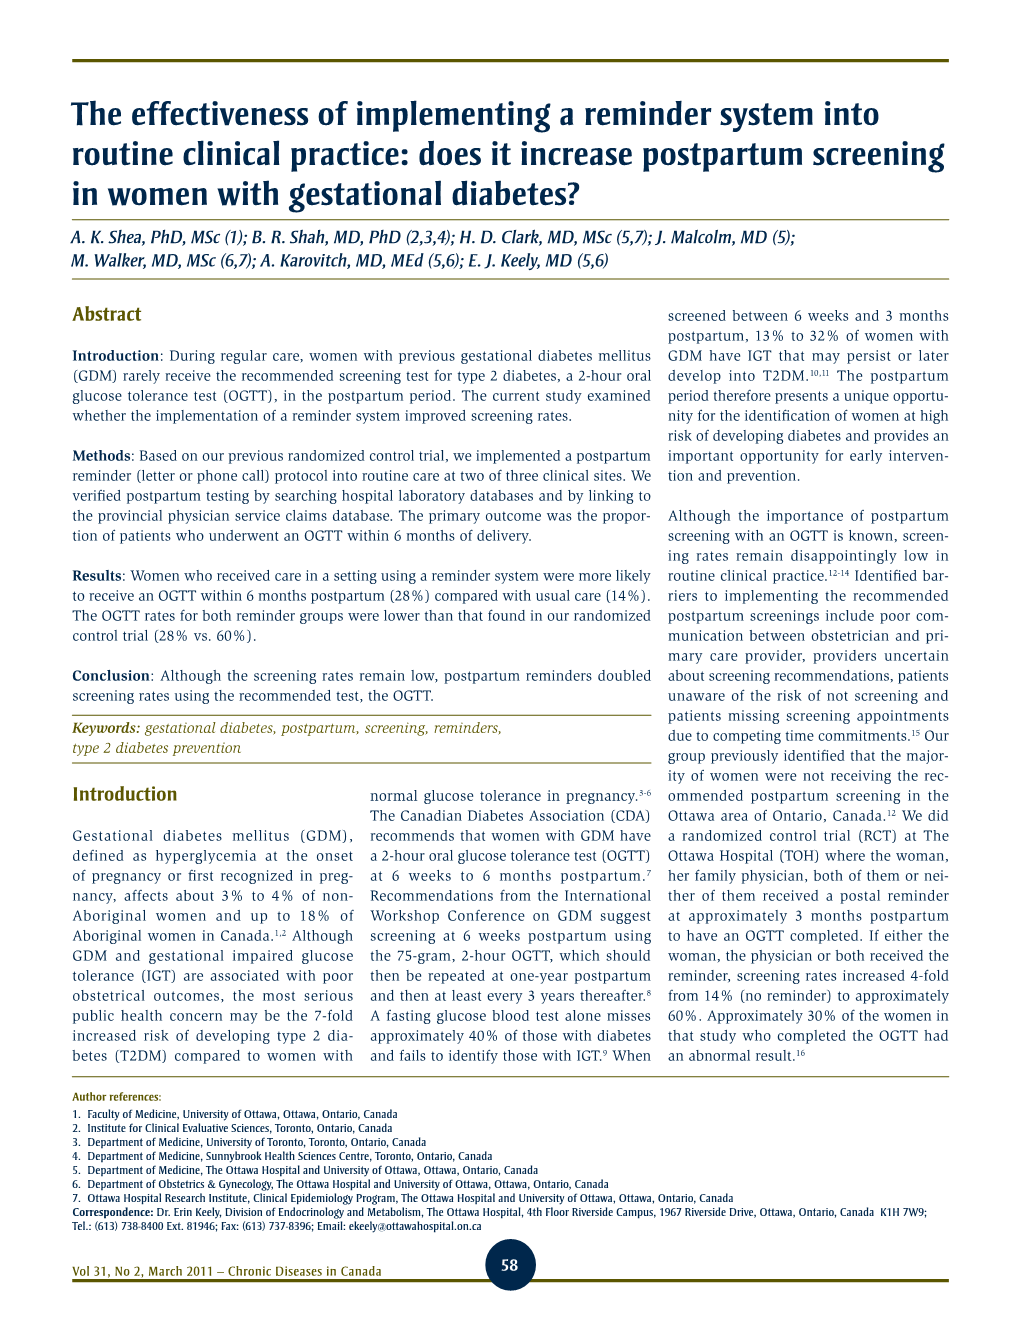 The Effectiveness of Implementing a Reminder System Into Routine Clinical Practice: Does It Increase Postpartum Screening in Women with Gestational Diabetes? A